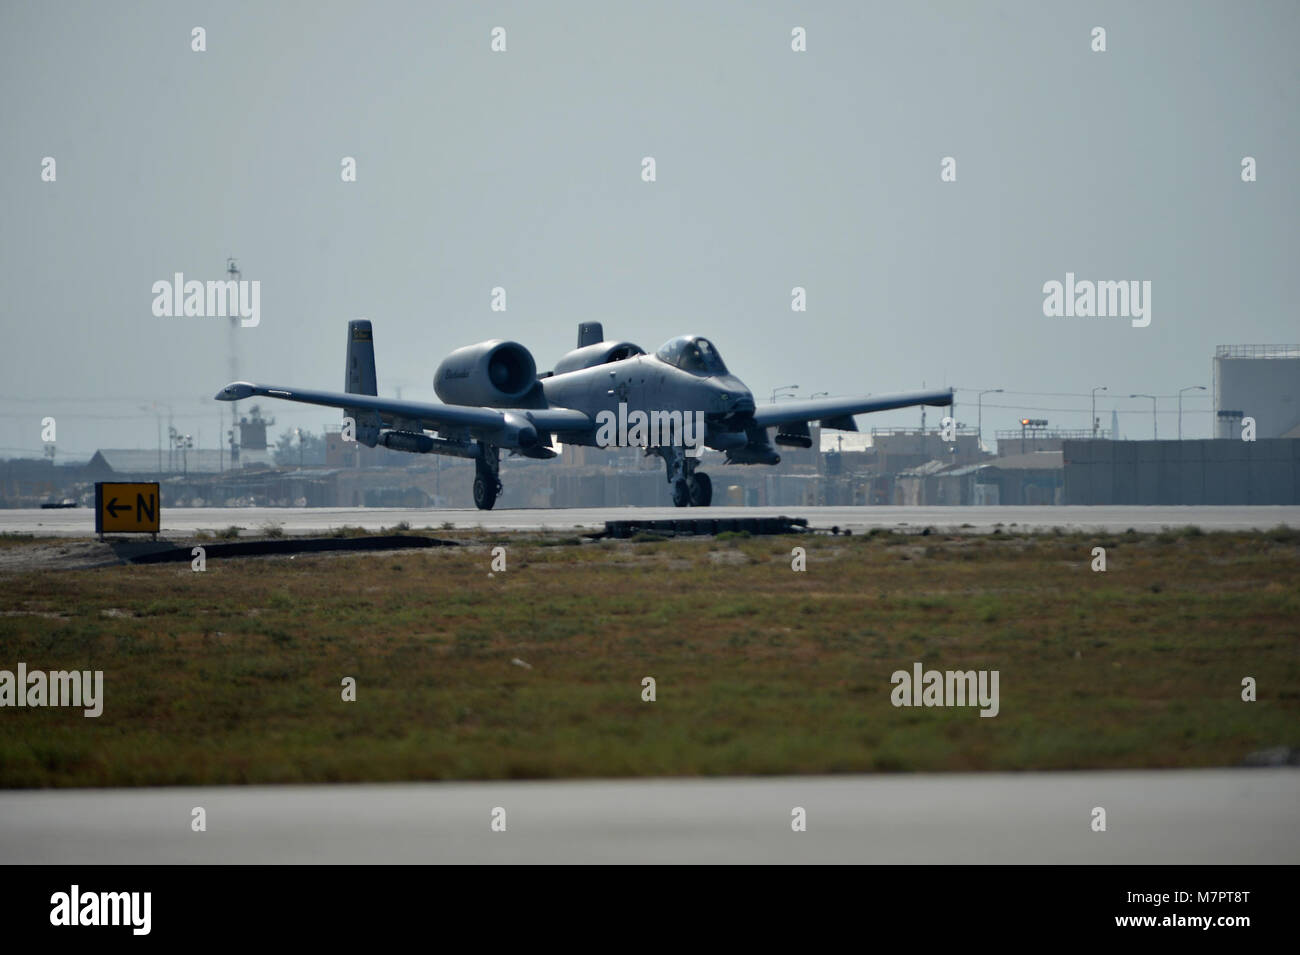 A U.S. Air Force A-10 Thunderbolt aircraft prepares to take off at Bagram Airfield, Afghanistan Oct. 24, 2014.  The A-10 is a specialized ground-attack aircraft which provides close air support to ground forces operating in Afghanistan. (U.S. Air Force photo by Staff Sgt. Evelyn Chavez) 455th Air Expeditionary Wing Bagram Airfield, Afghanistan Stock Photo